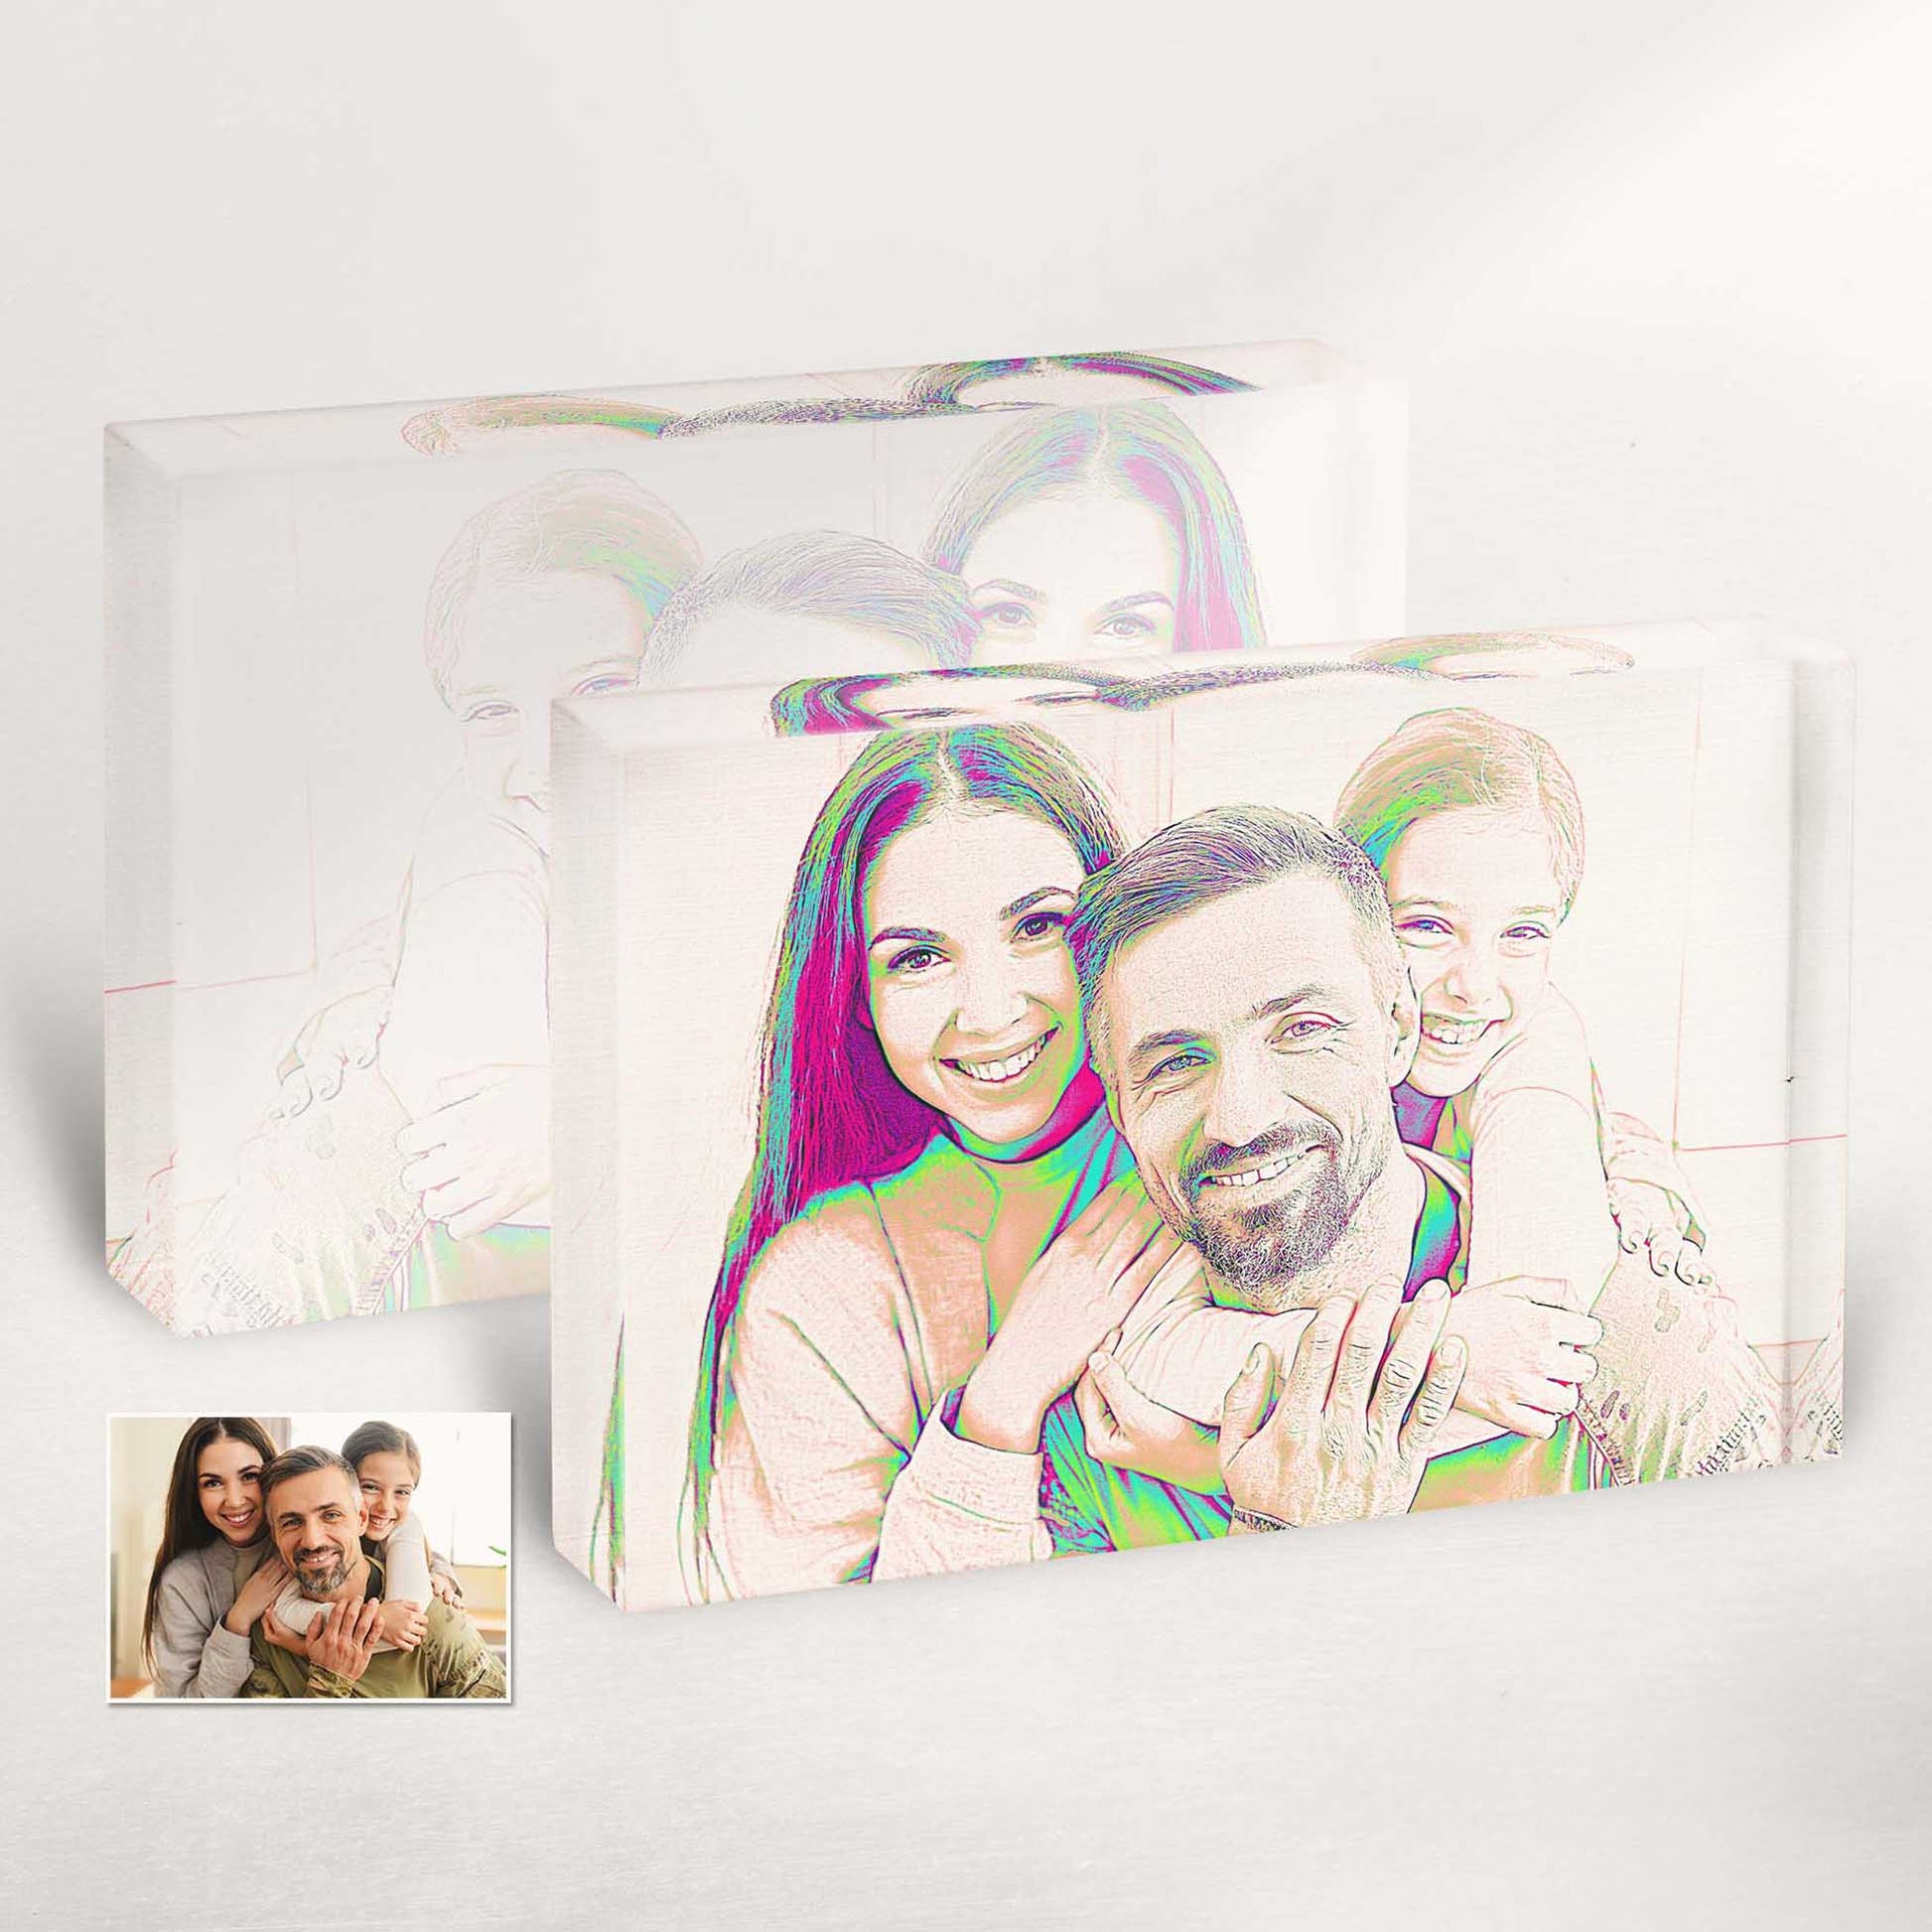 Original Personalized Pencil Drawing Acrylic Block Photo: Celebrate your loved ones with this one-of-a-kind masterpiece. The artist meticulously recreates your chosen photograph in pencil